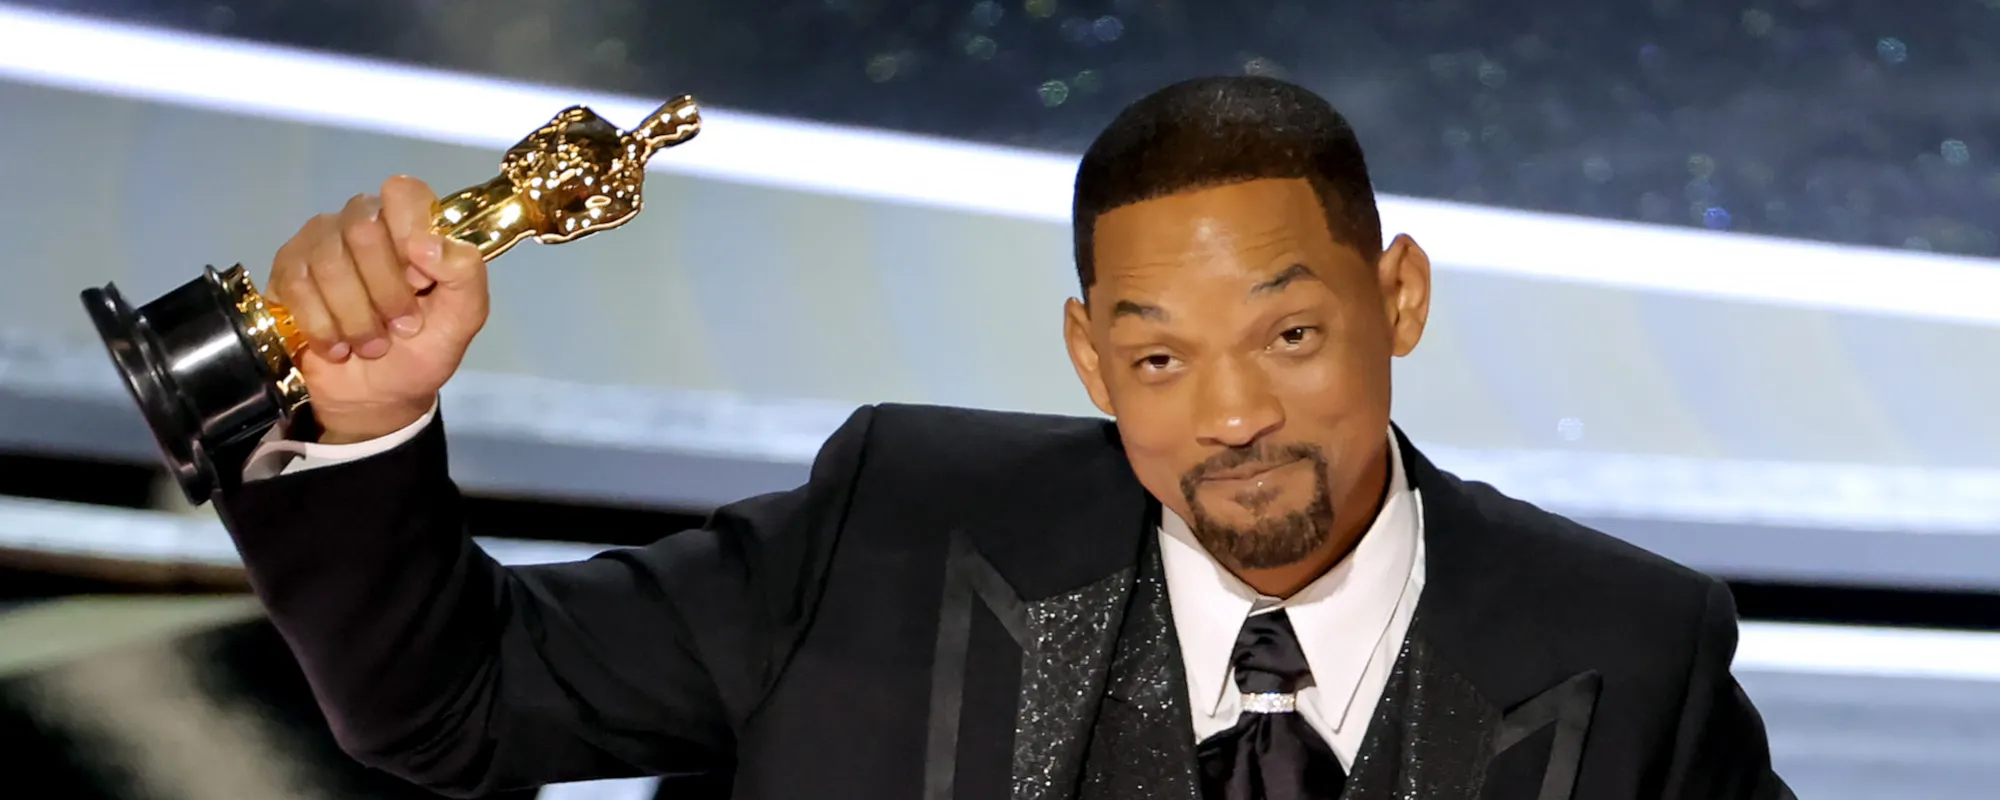 Will Smith Opens Up About Oscars Slap – “Chris, I Apologize to You”